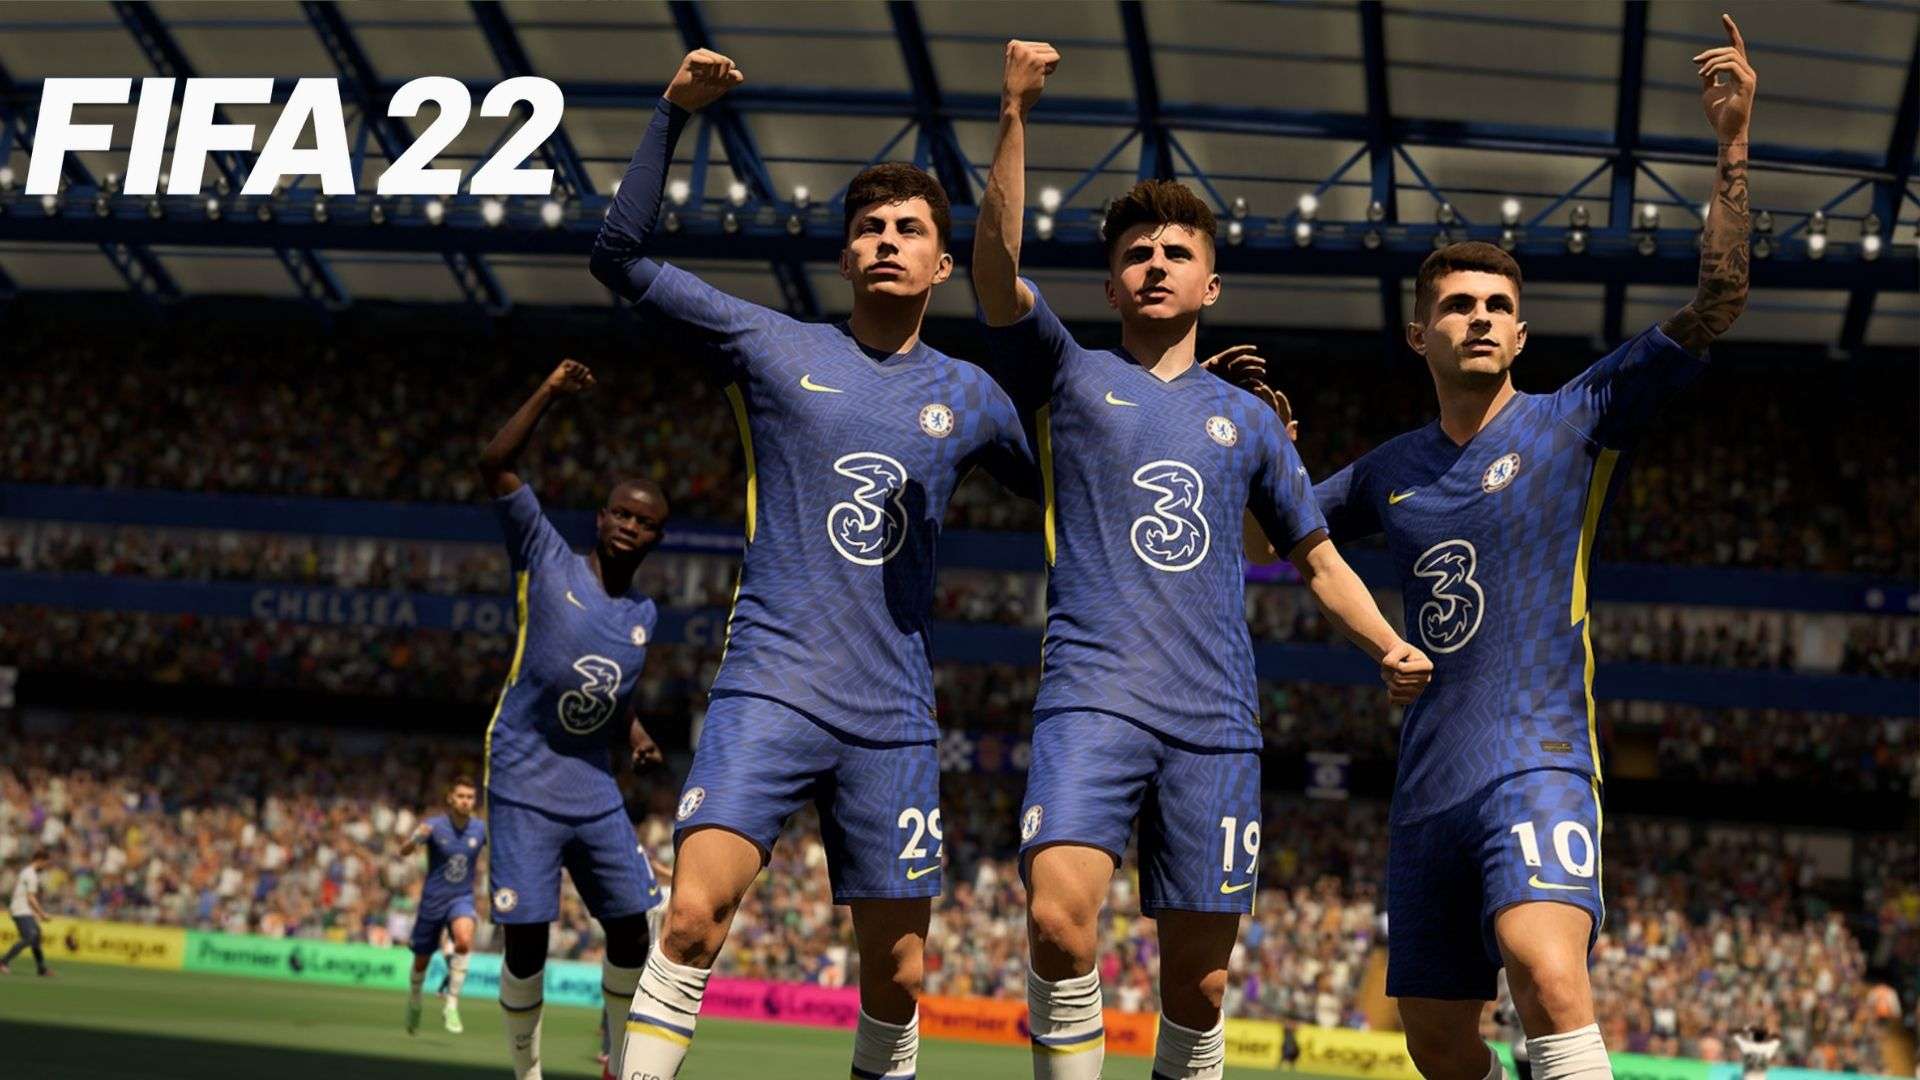 Chelsea players celebrating in FIFA 22